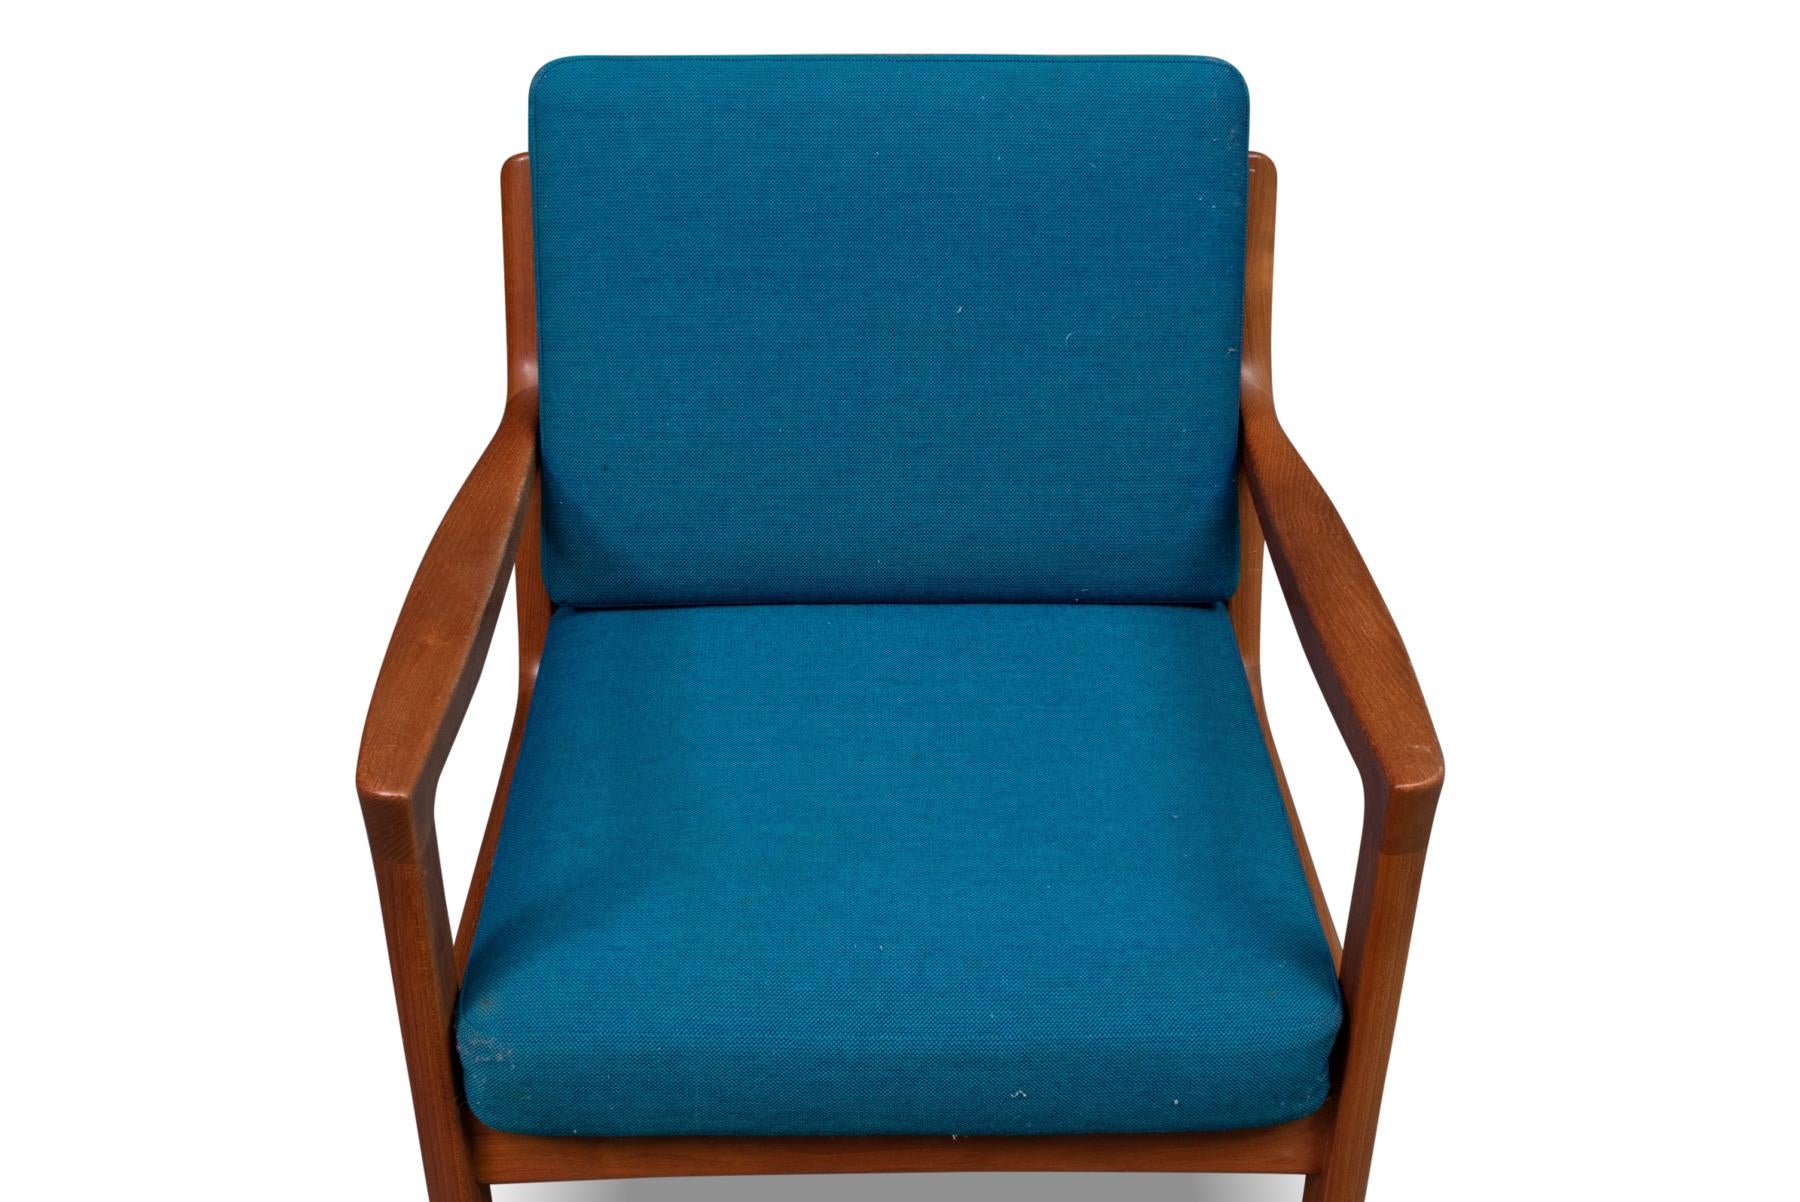 Model 166 Senator Lounge Chair by Ole Wanscher In Good Condition For Sale In Berkeley, CA